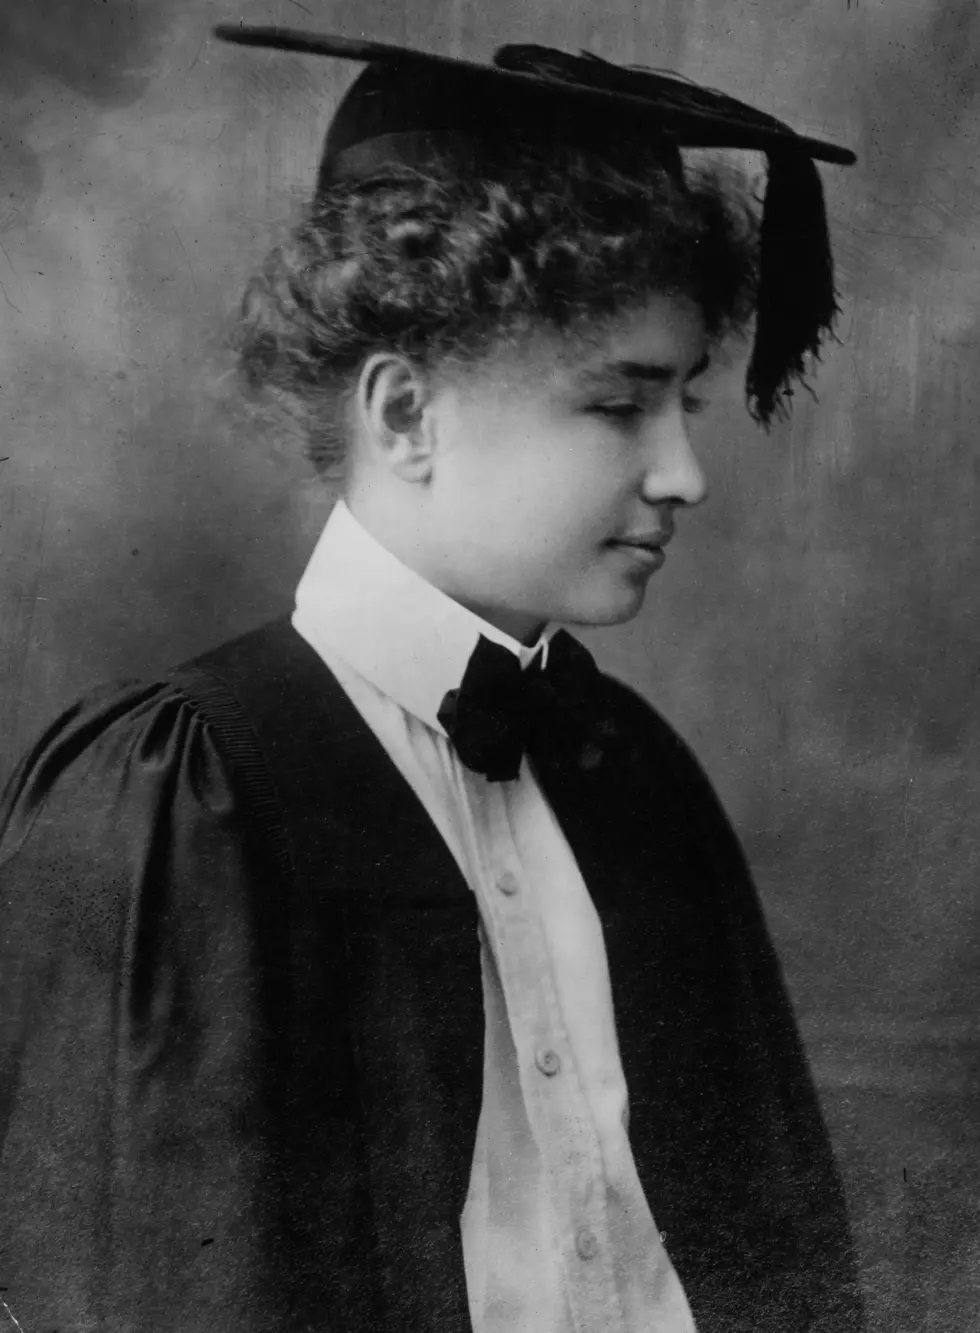 Alabama Officials Campaign to Select Helen Keller for New $10 Bill